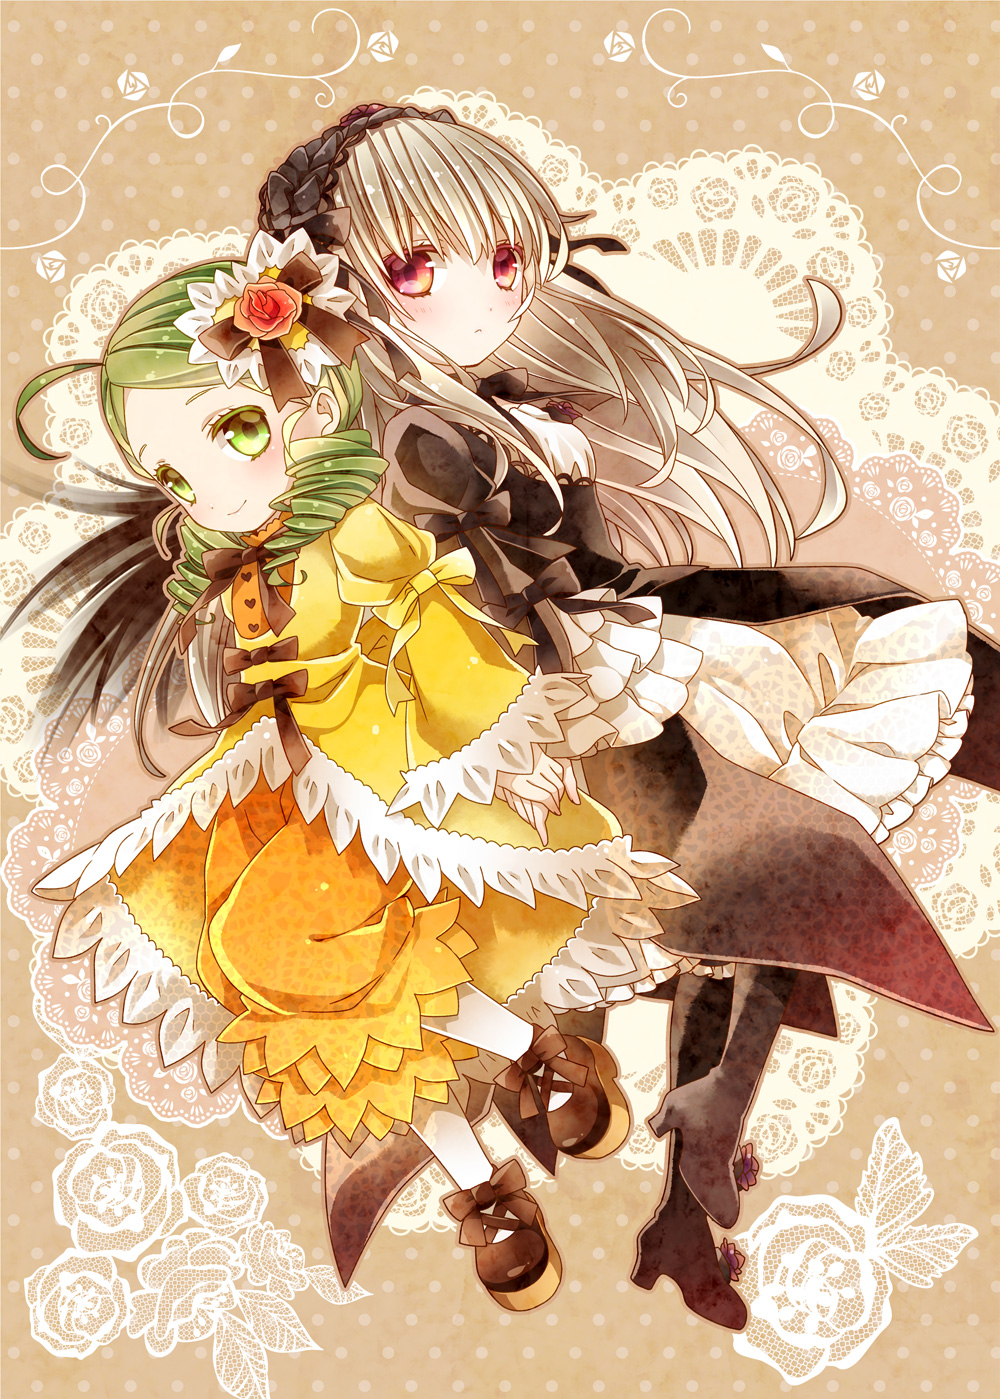 2girls back-to-back boots bow dress drill_hair flower frills gothic_lolita green_eyes green_hair hair_ornament hairband heart high_heels highres holding_hands kanaria lolita_fashion long_hair long_sleeves mary_janes moru multiple_girls pantyhose puffy_sleeves red_eyes rose rozen_maiden shoes silver_hair smile suigintou white_legwear wide_sleeves wings